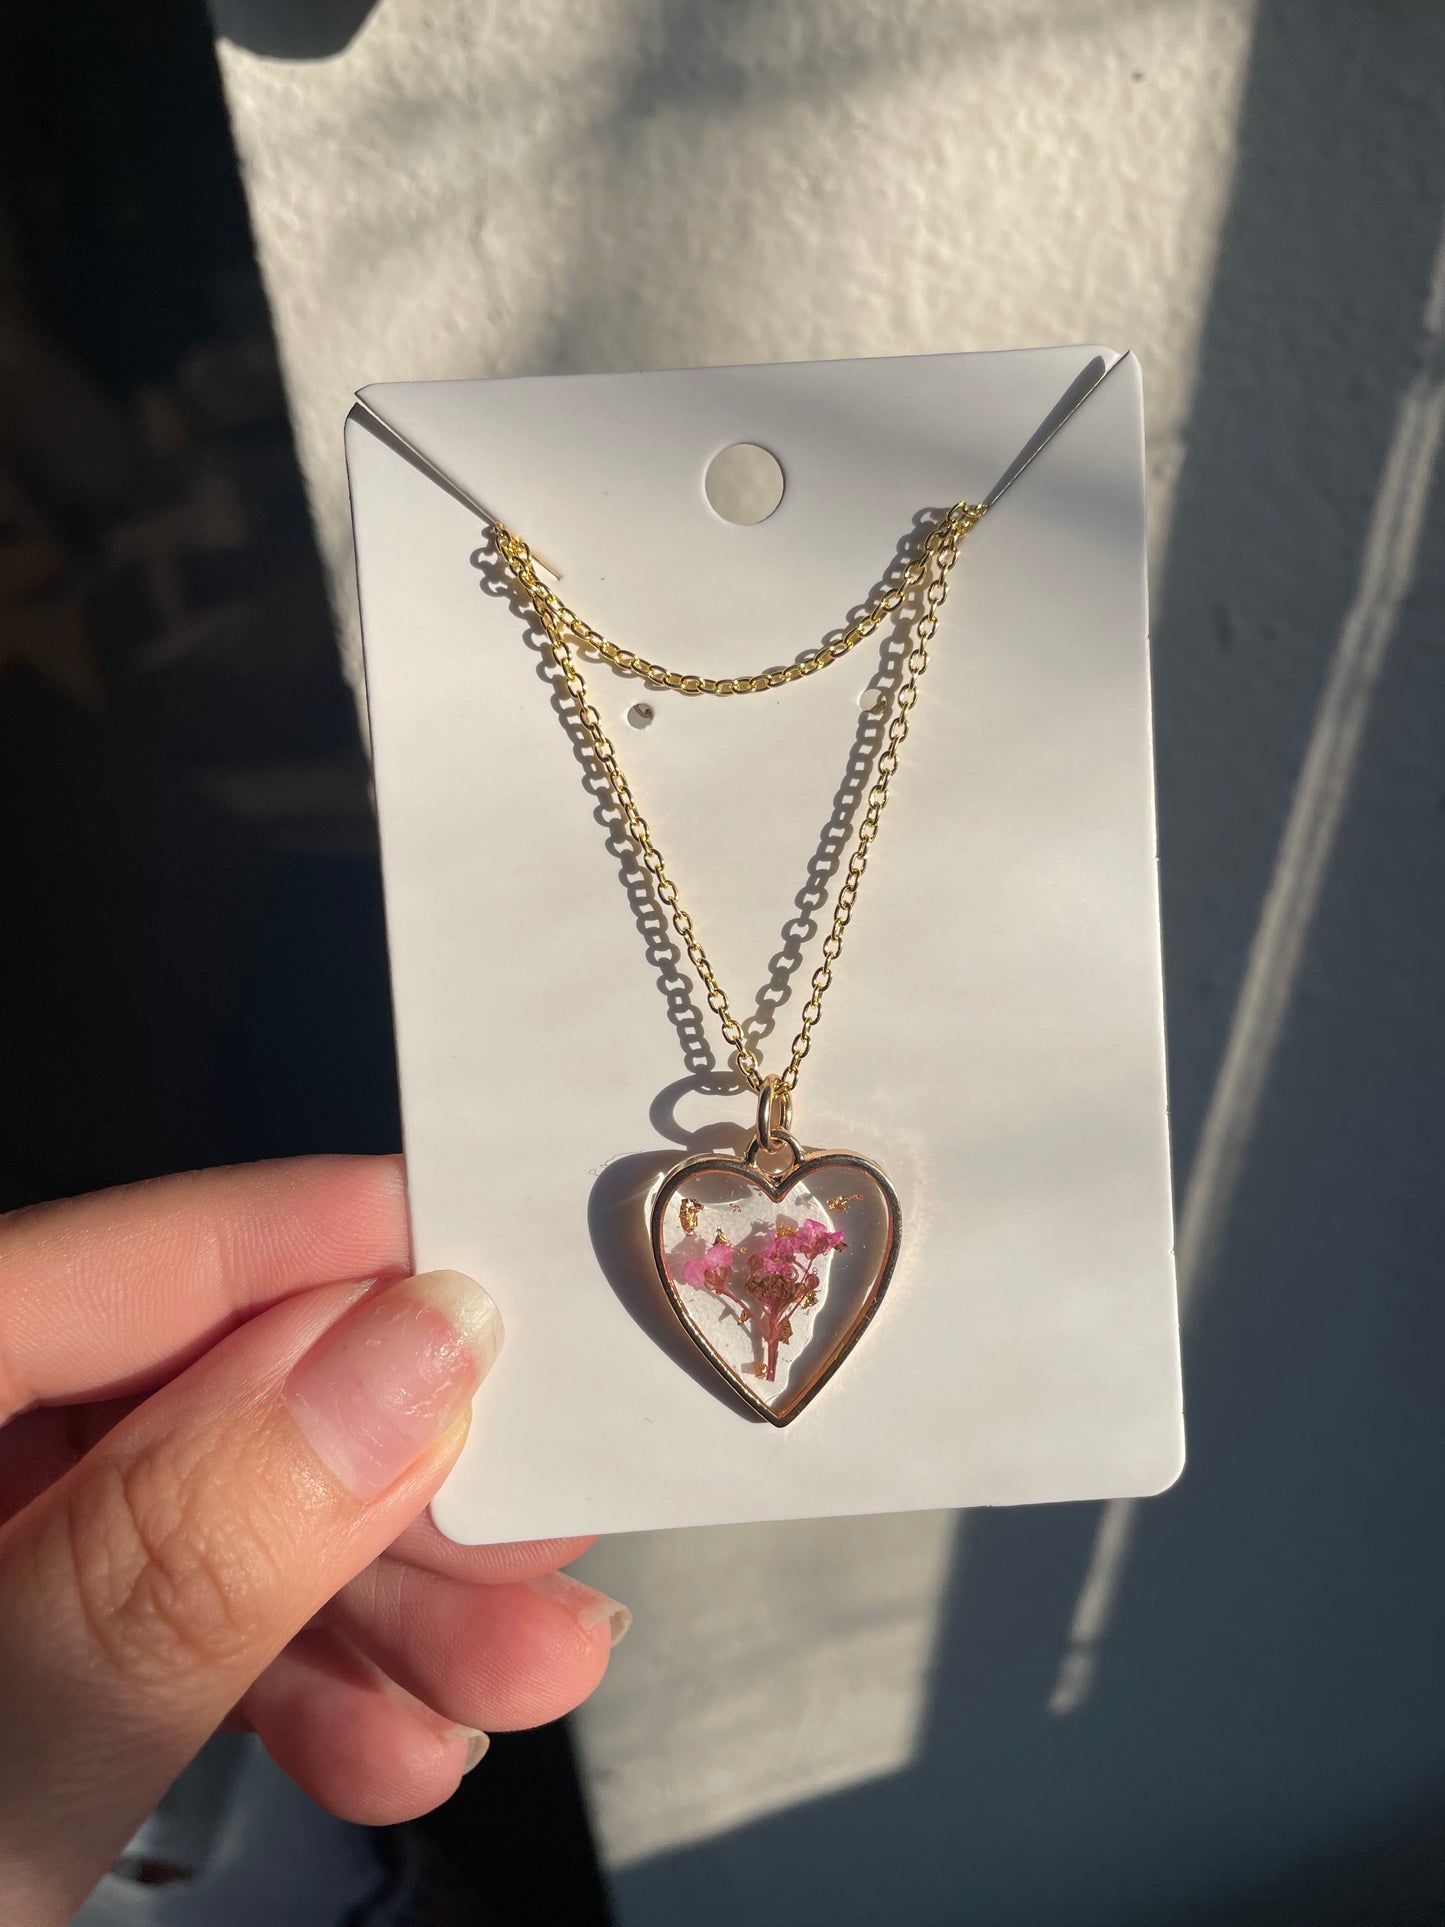 Gold heart necklaces